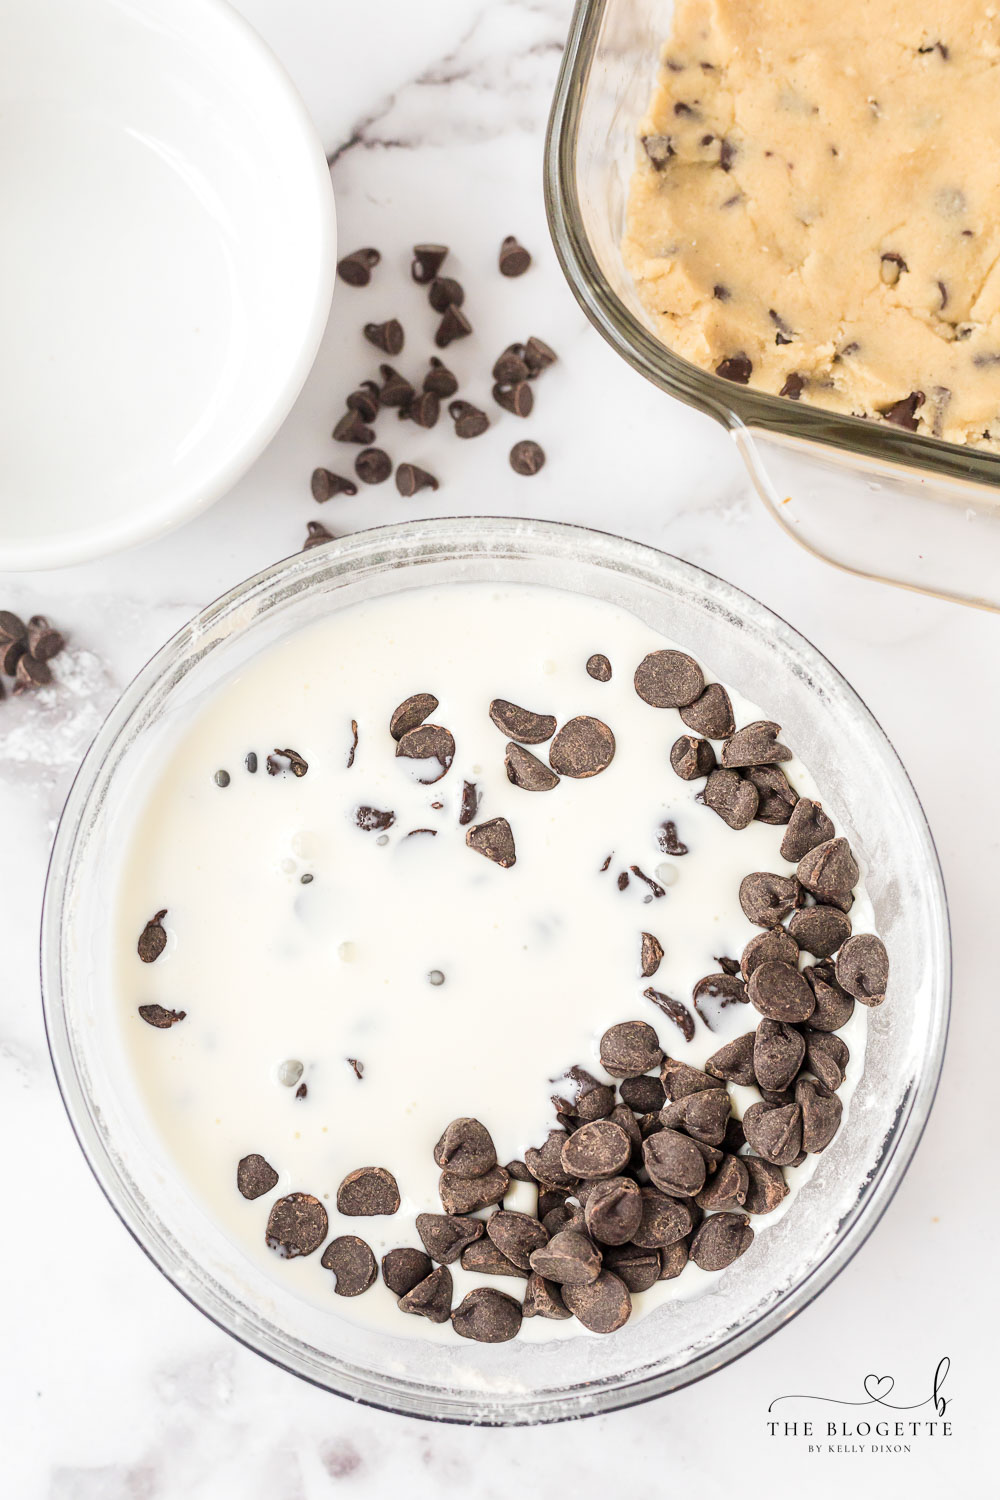 Chocolate chips in heavy cream